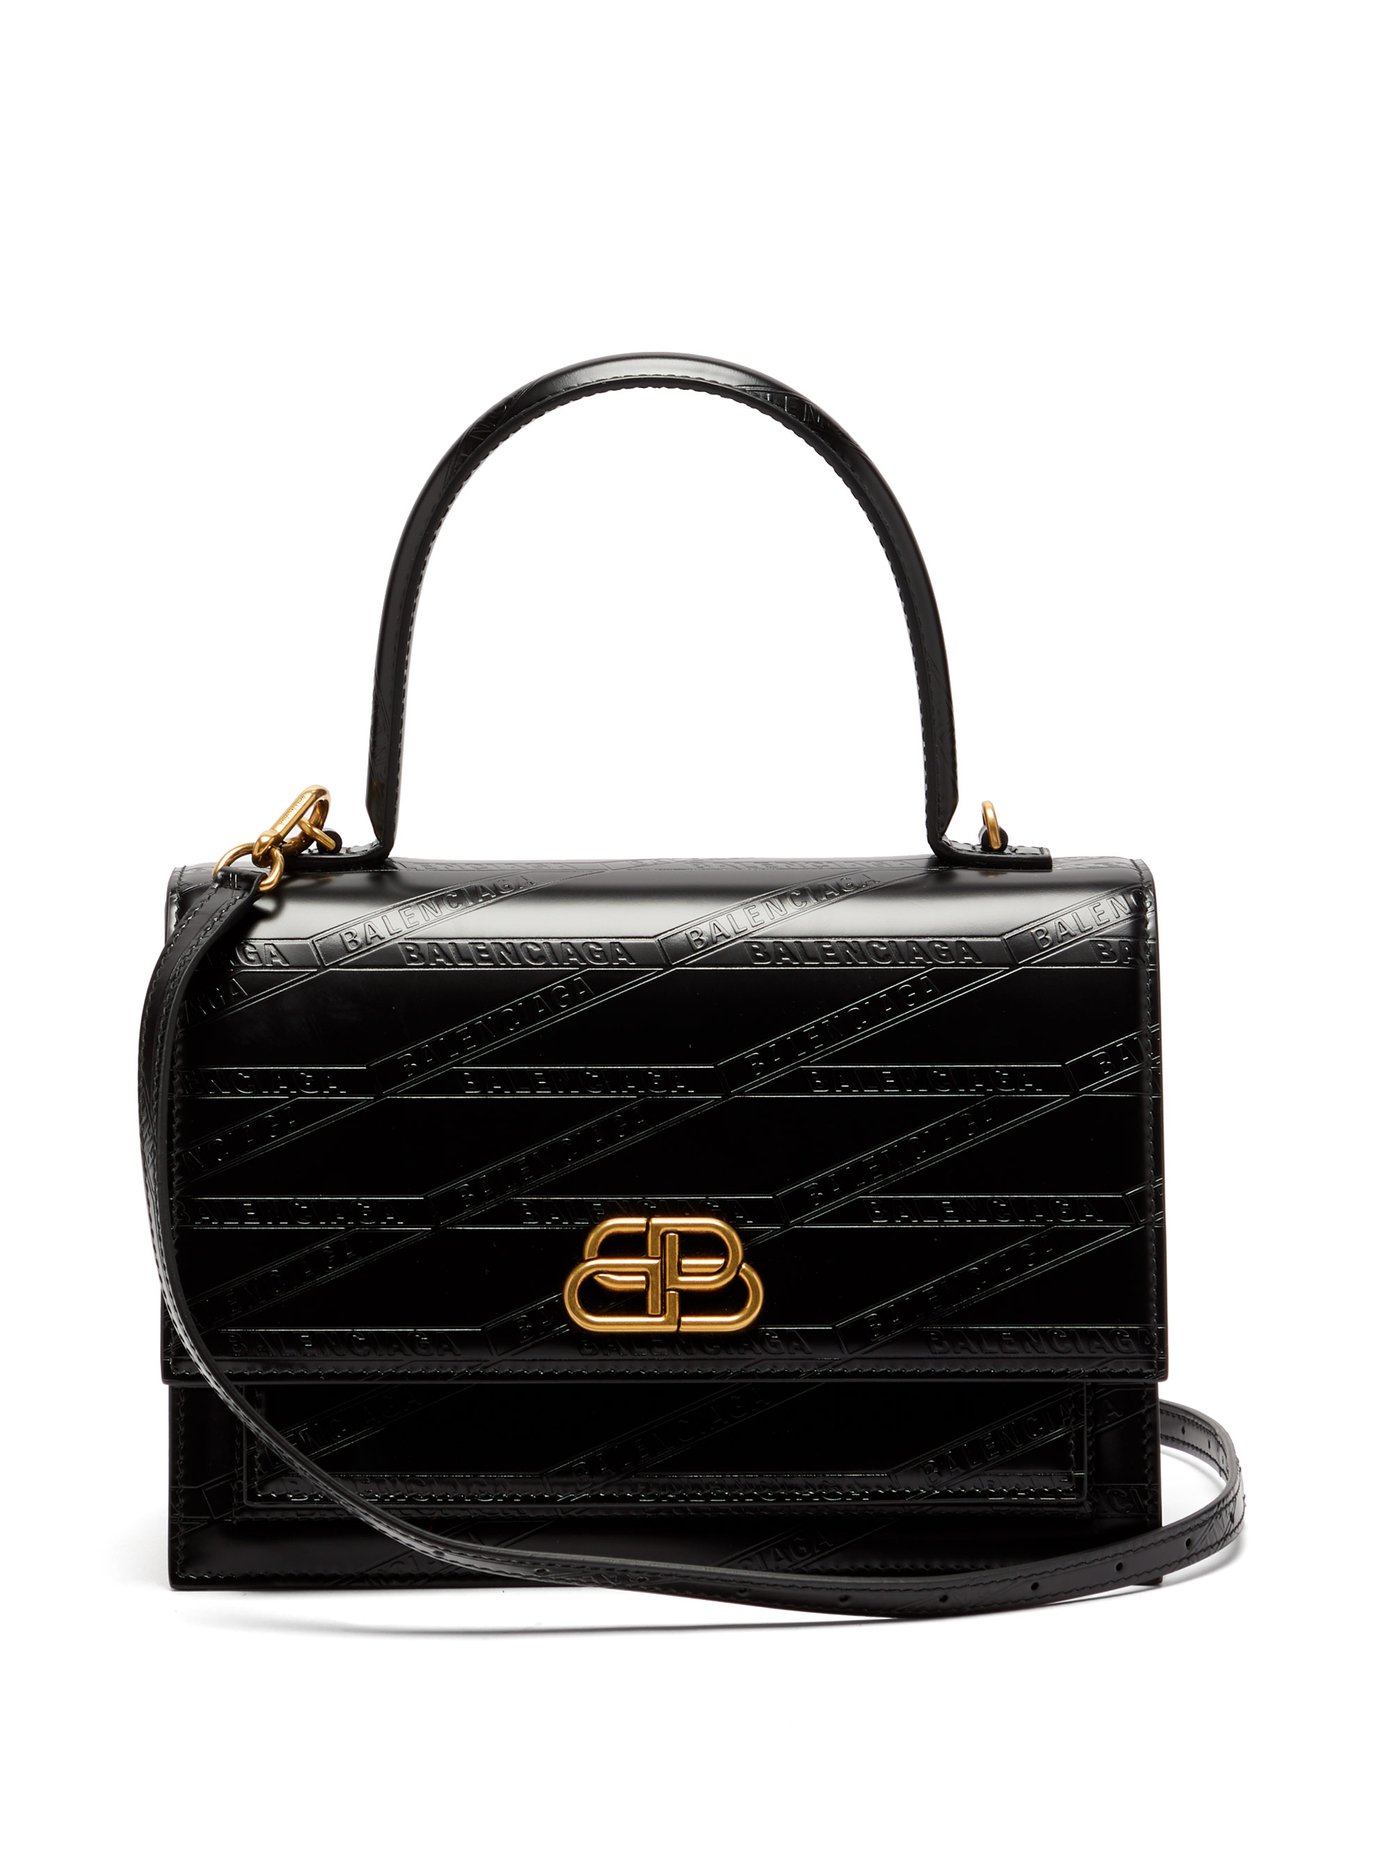 Balenciaga Bags outlet  Women  1800 products on sale  FASHIOLAcouk